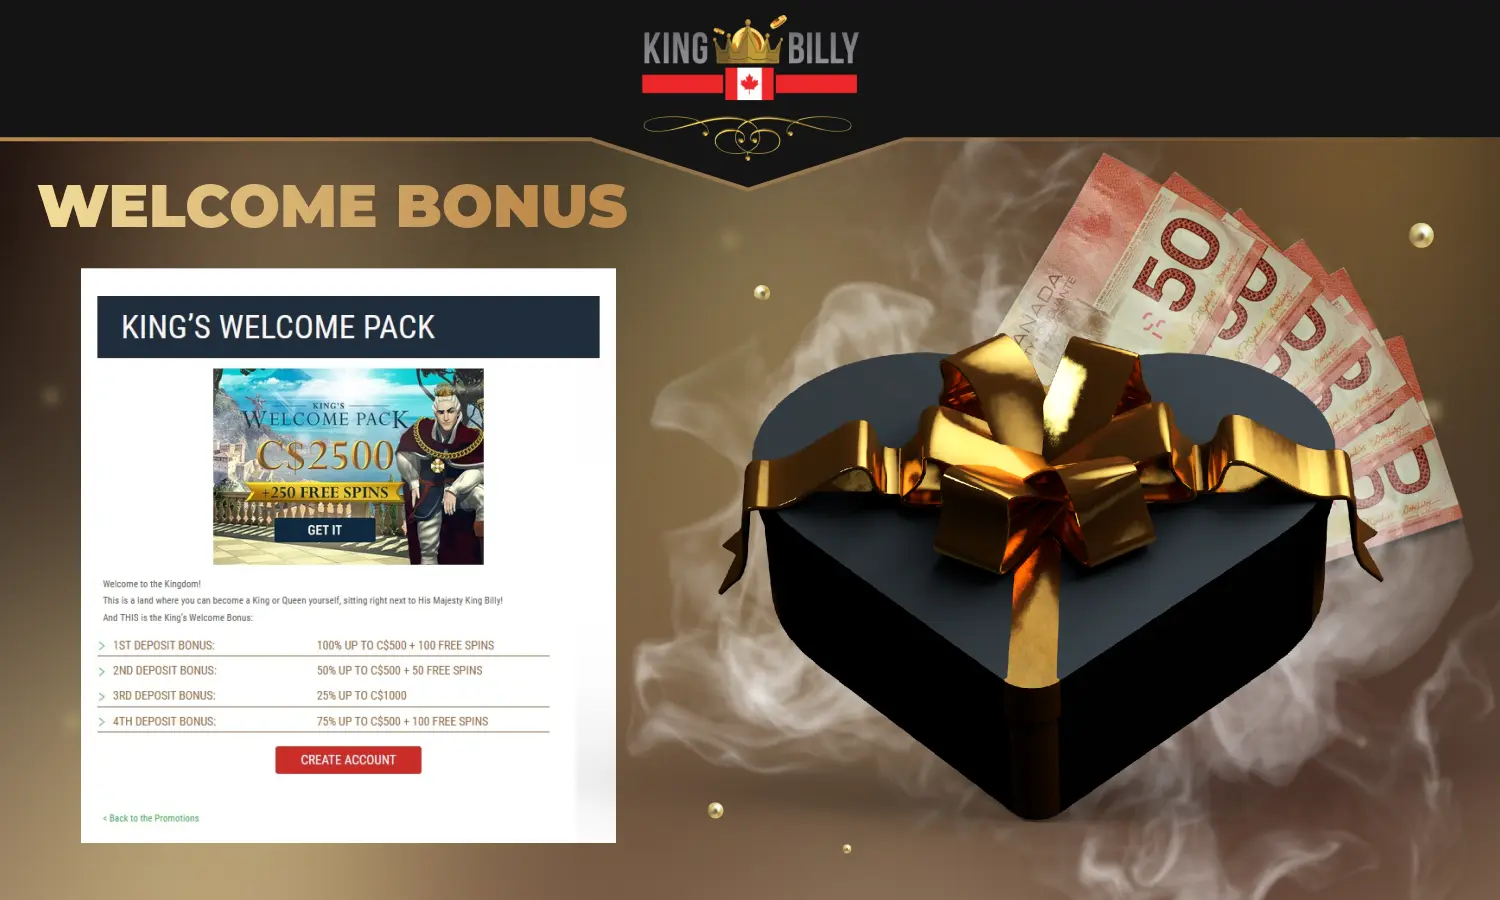 Every new Canadian user who signs up at King Billy Casino can get a sign up bonus